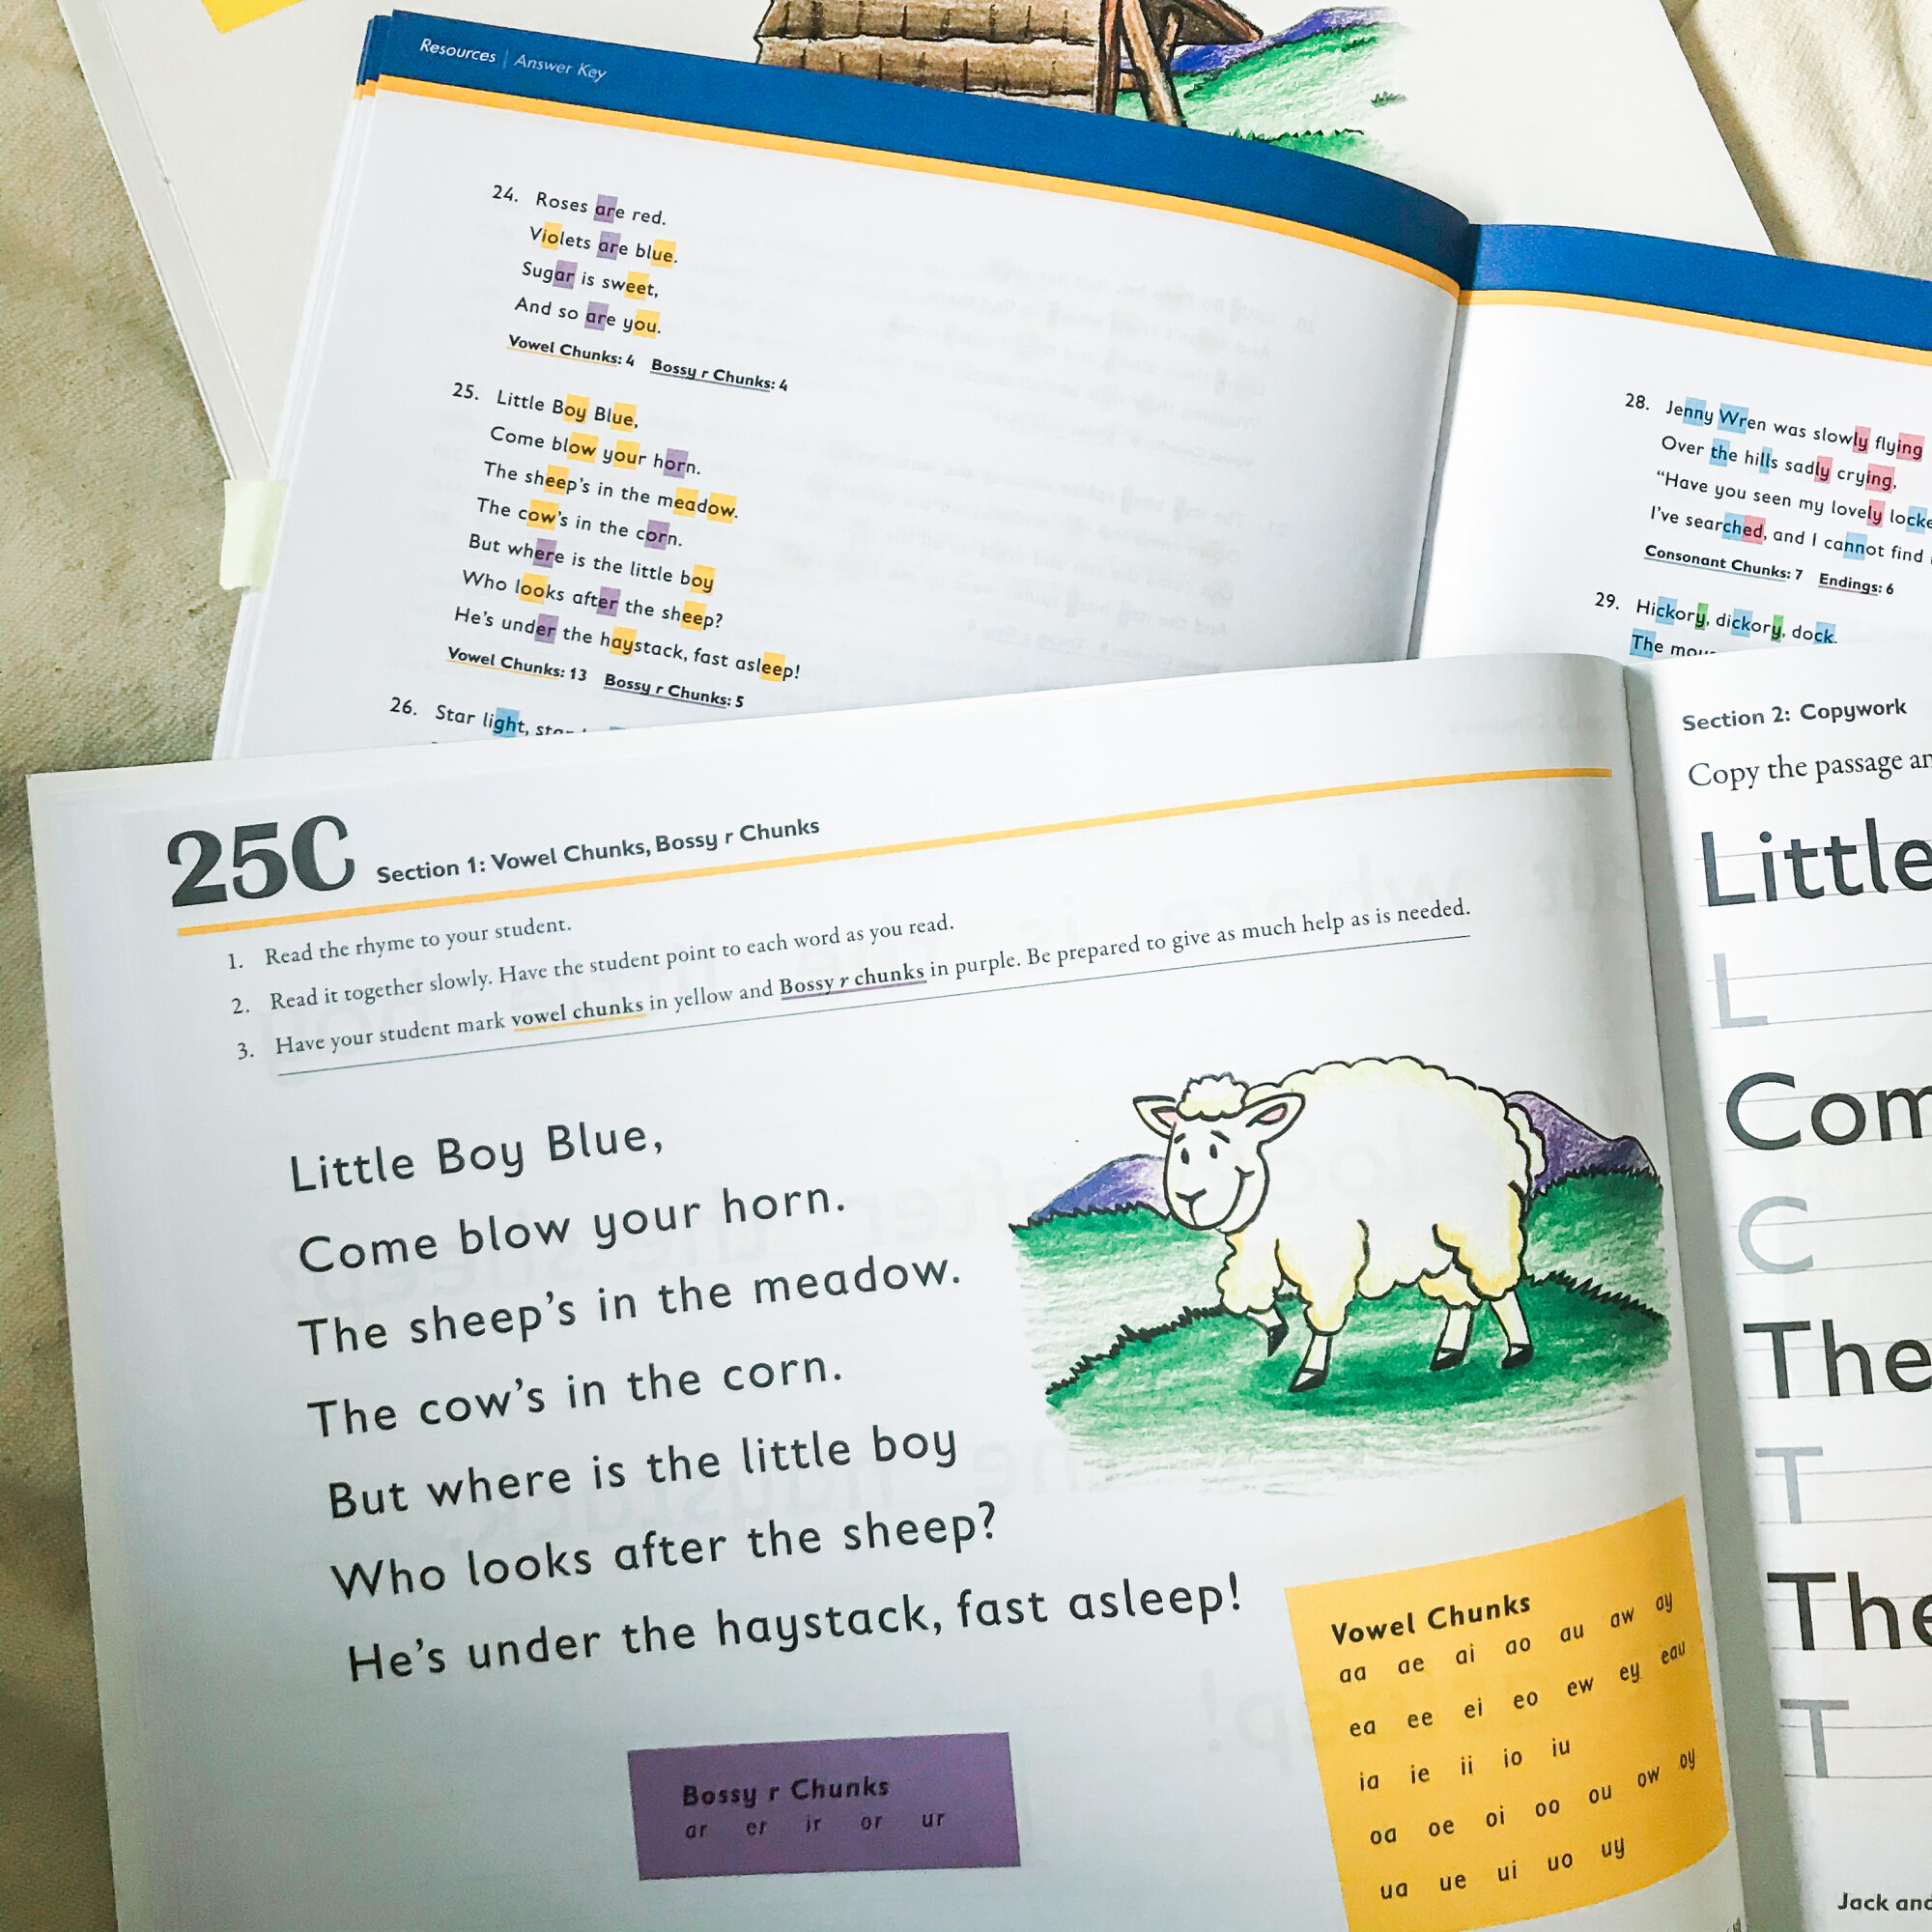 first grade spelling curriculum example with answers shown